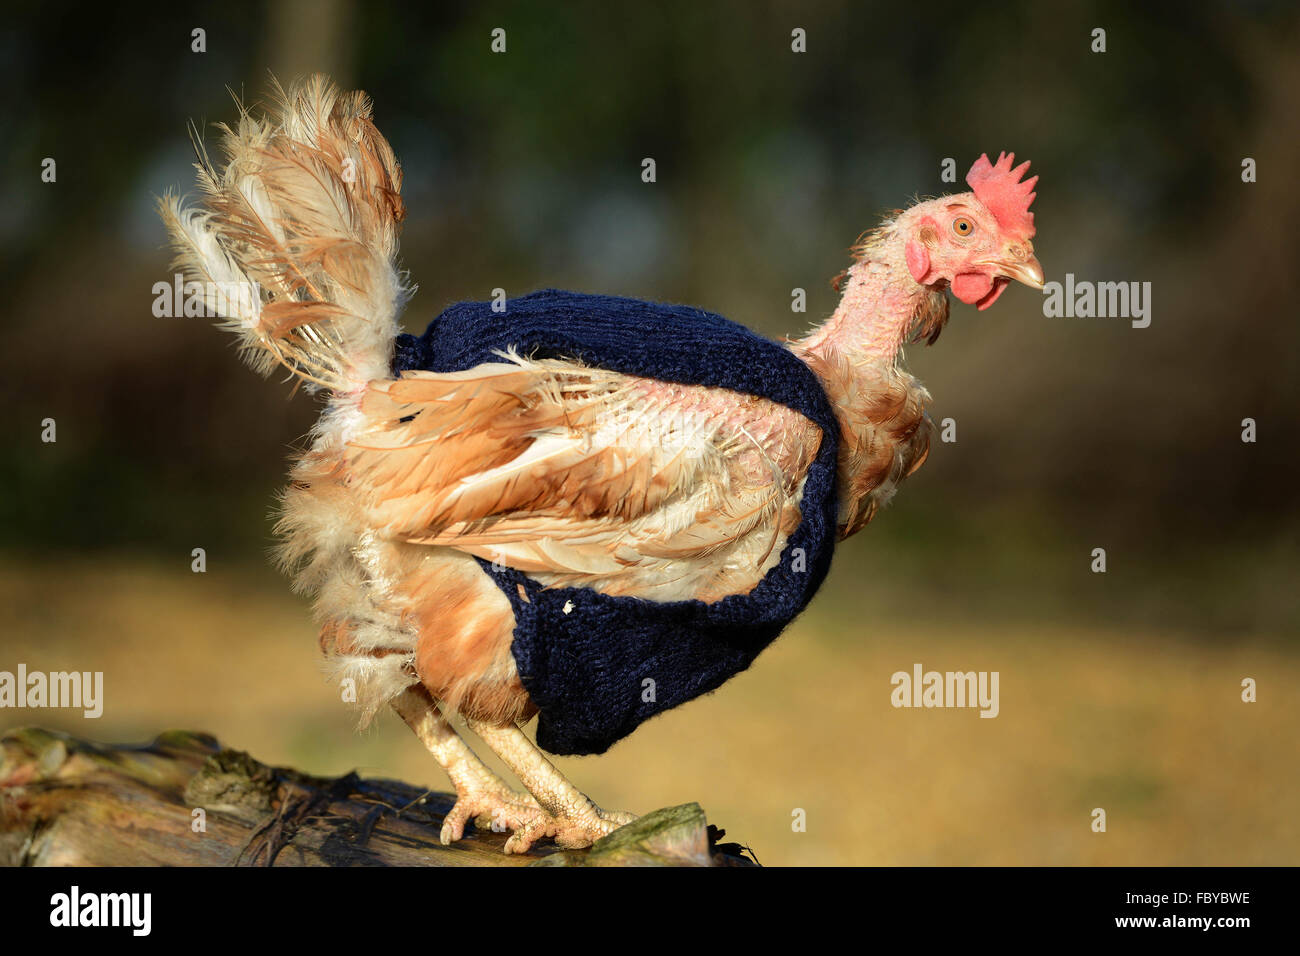 Ex battery hens with knitted woollen jumpers Stock Photo